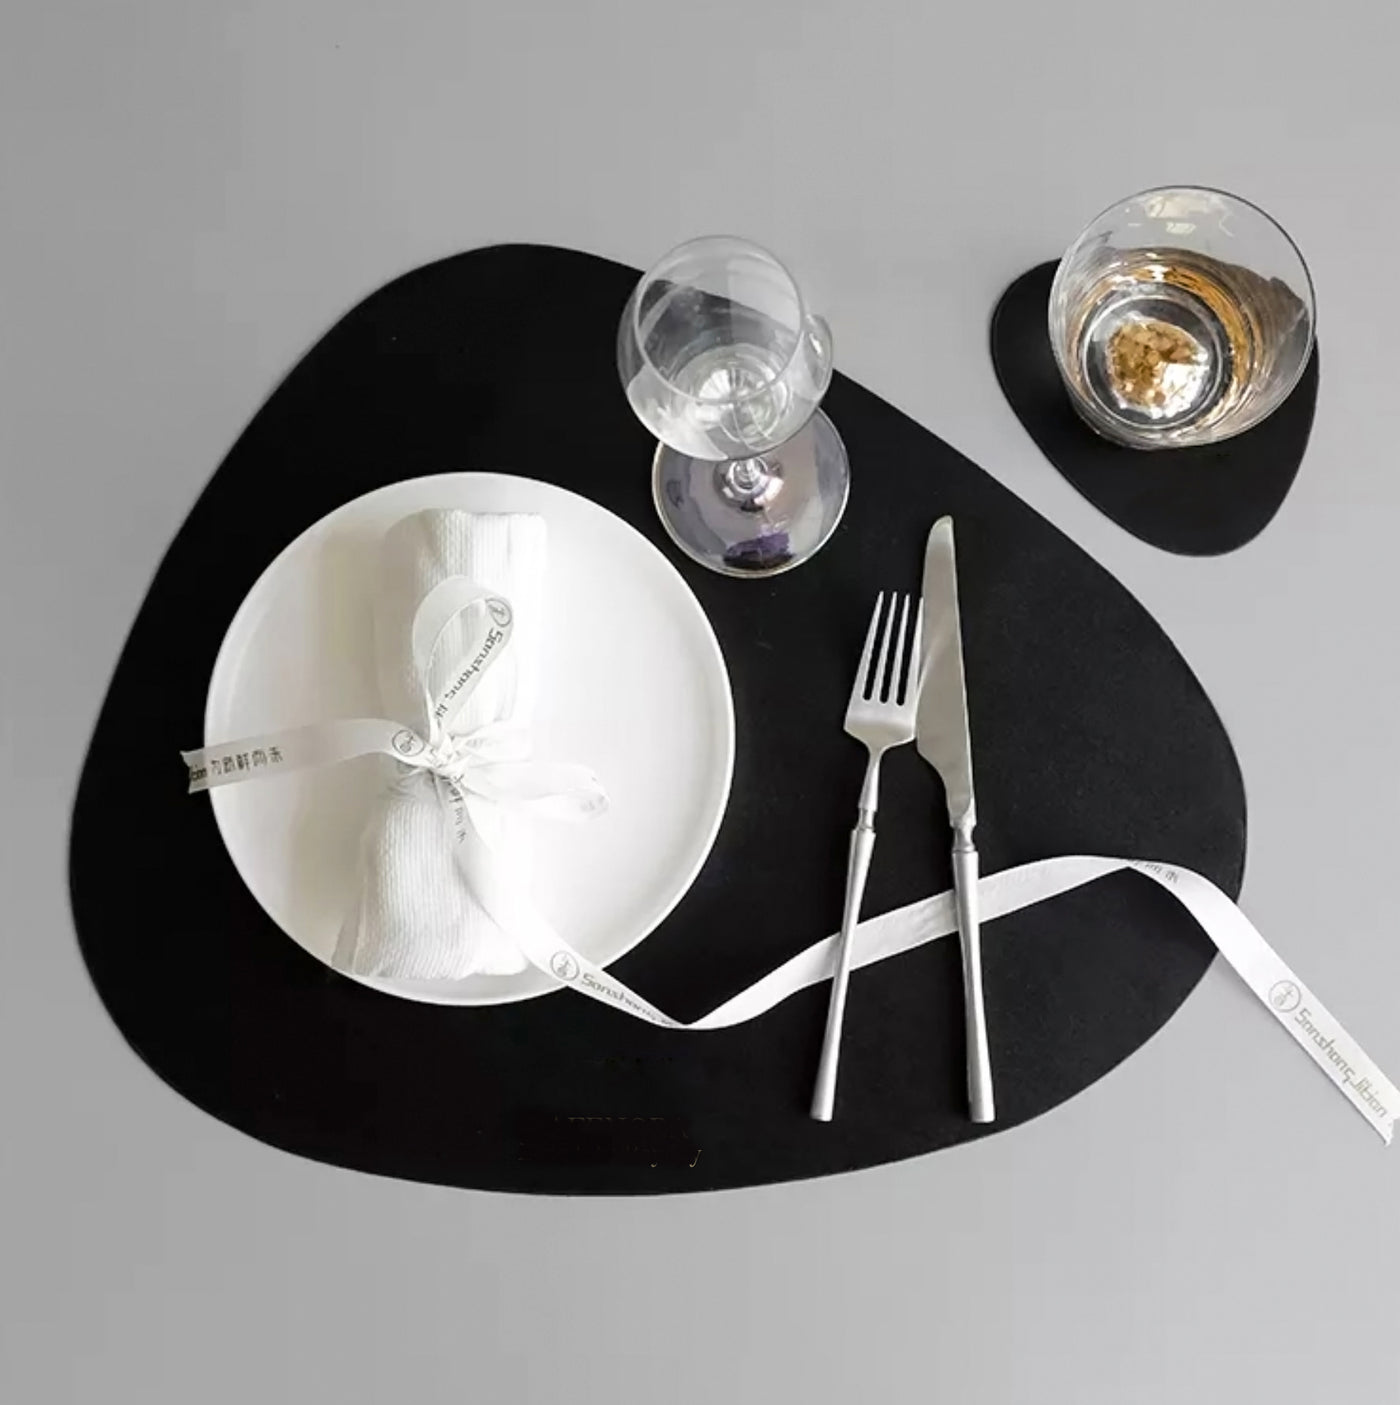 Doublesided Modern Leather Placemats - lafenora